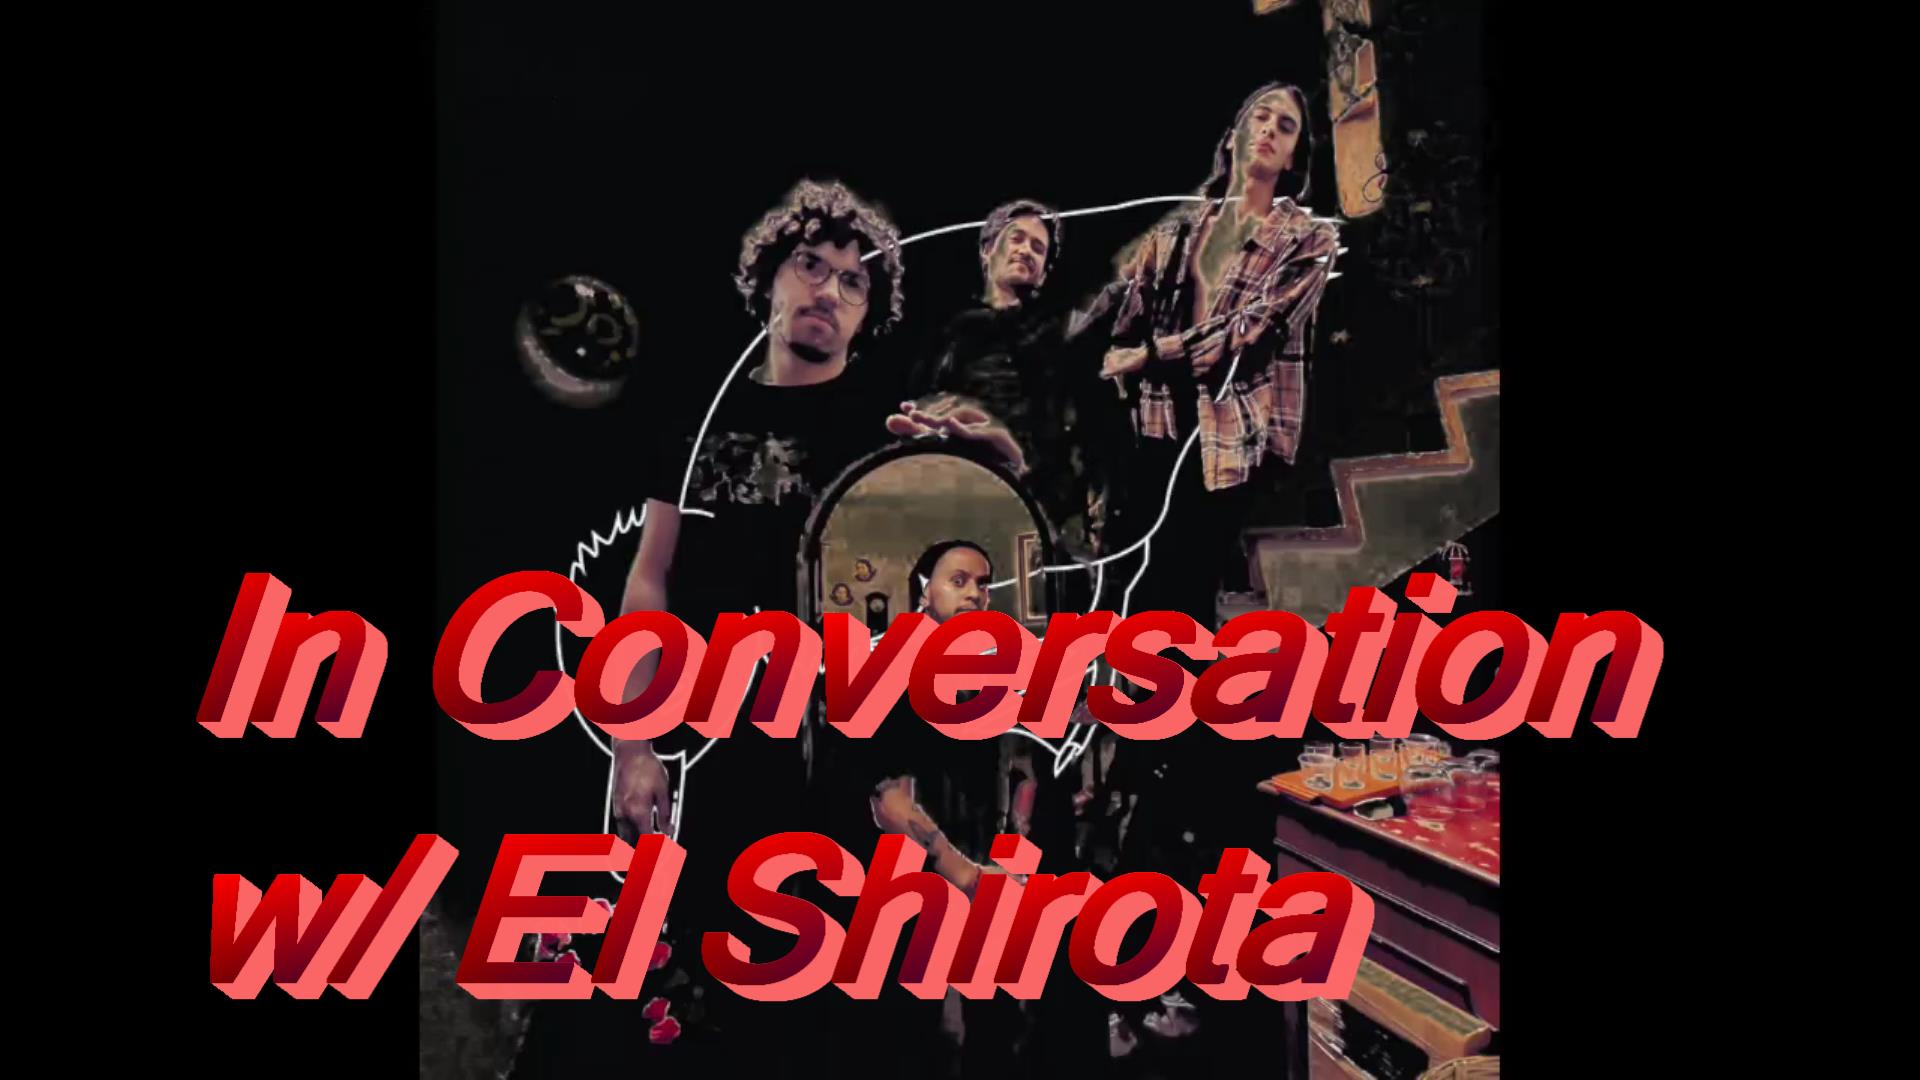 Aug 14, 2020 Paula Santana, WRSU^s World Music Director, had the chance to talk to Mexican rock band El Shirota about being a musicians in quarantine, the meaning of music, and more! Listen to the full interview for some insightful introspection.<br/>Thumbnail photo cred to Alan Cortest<br/>Edited by Paula Santana